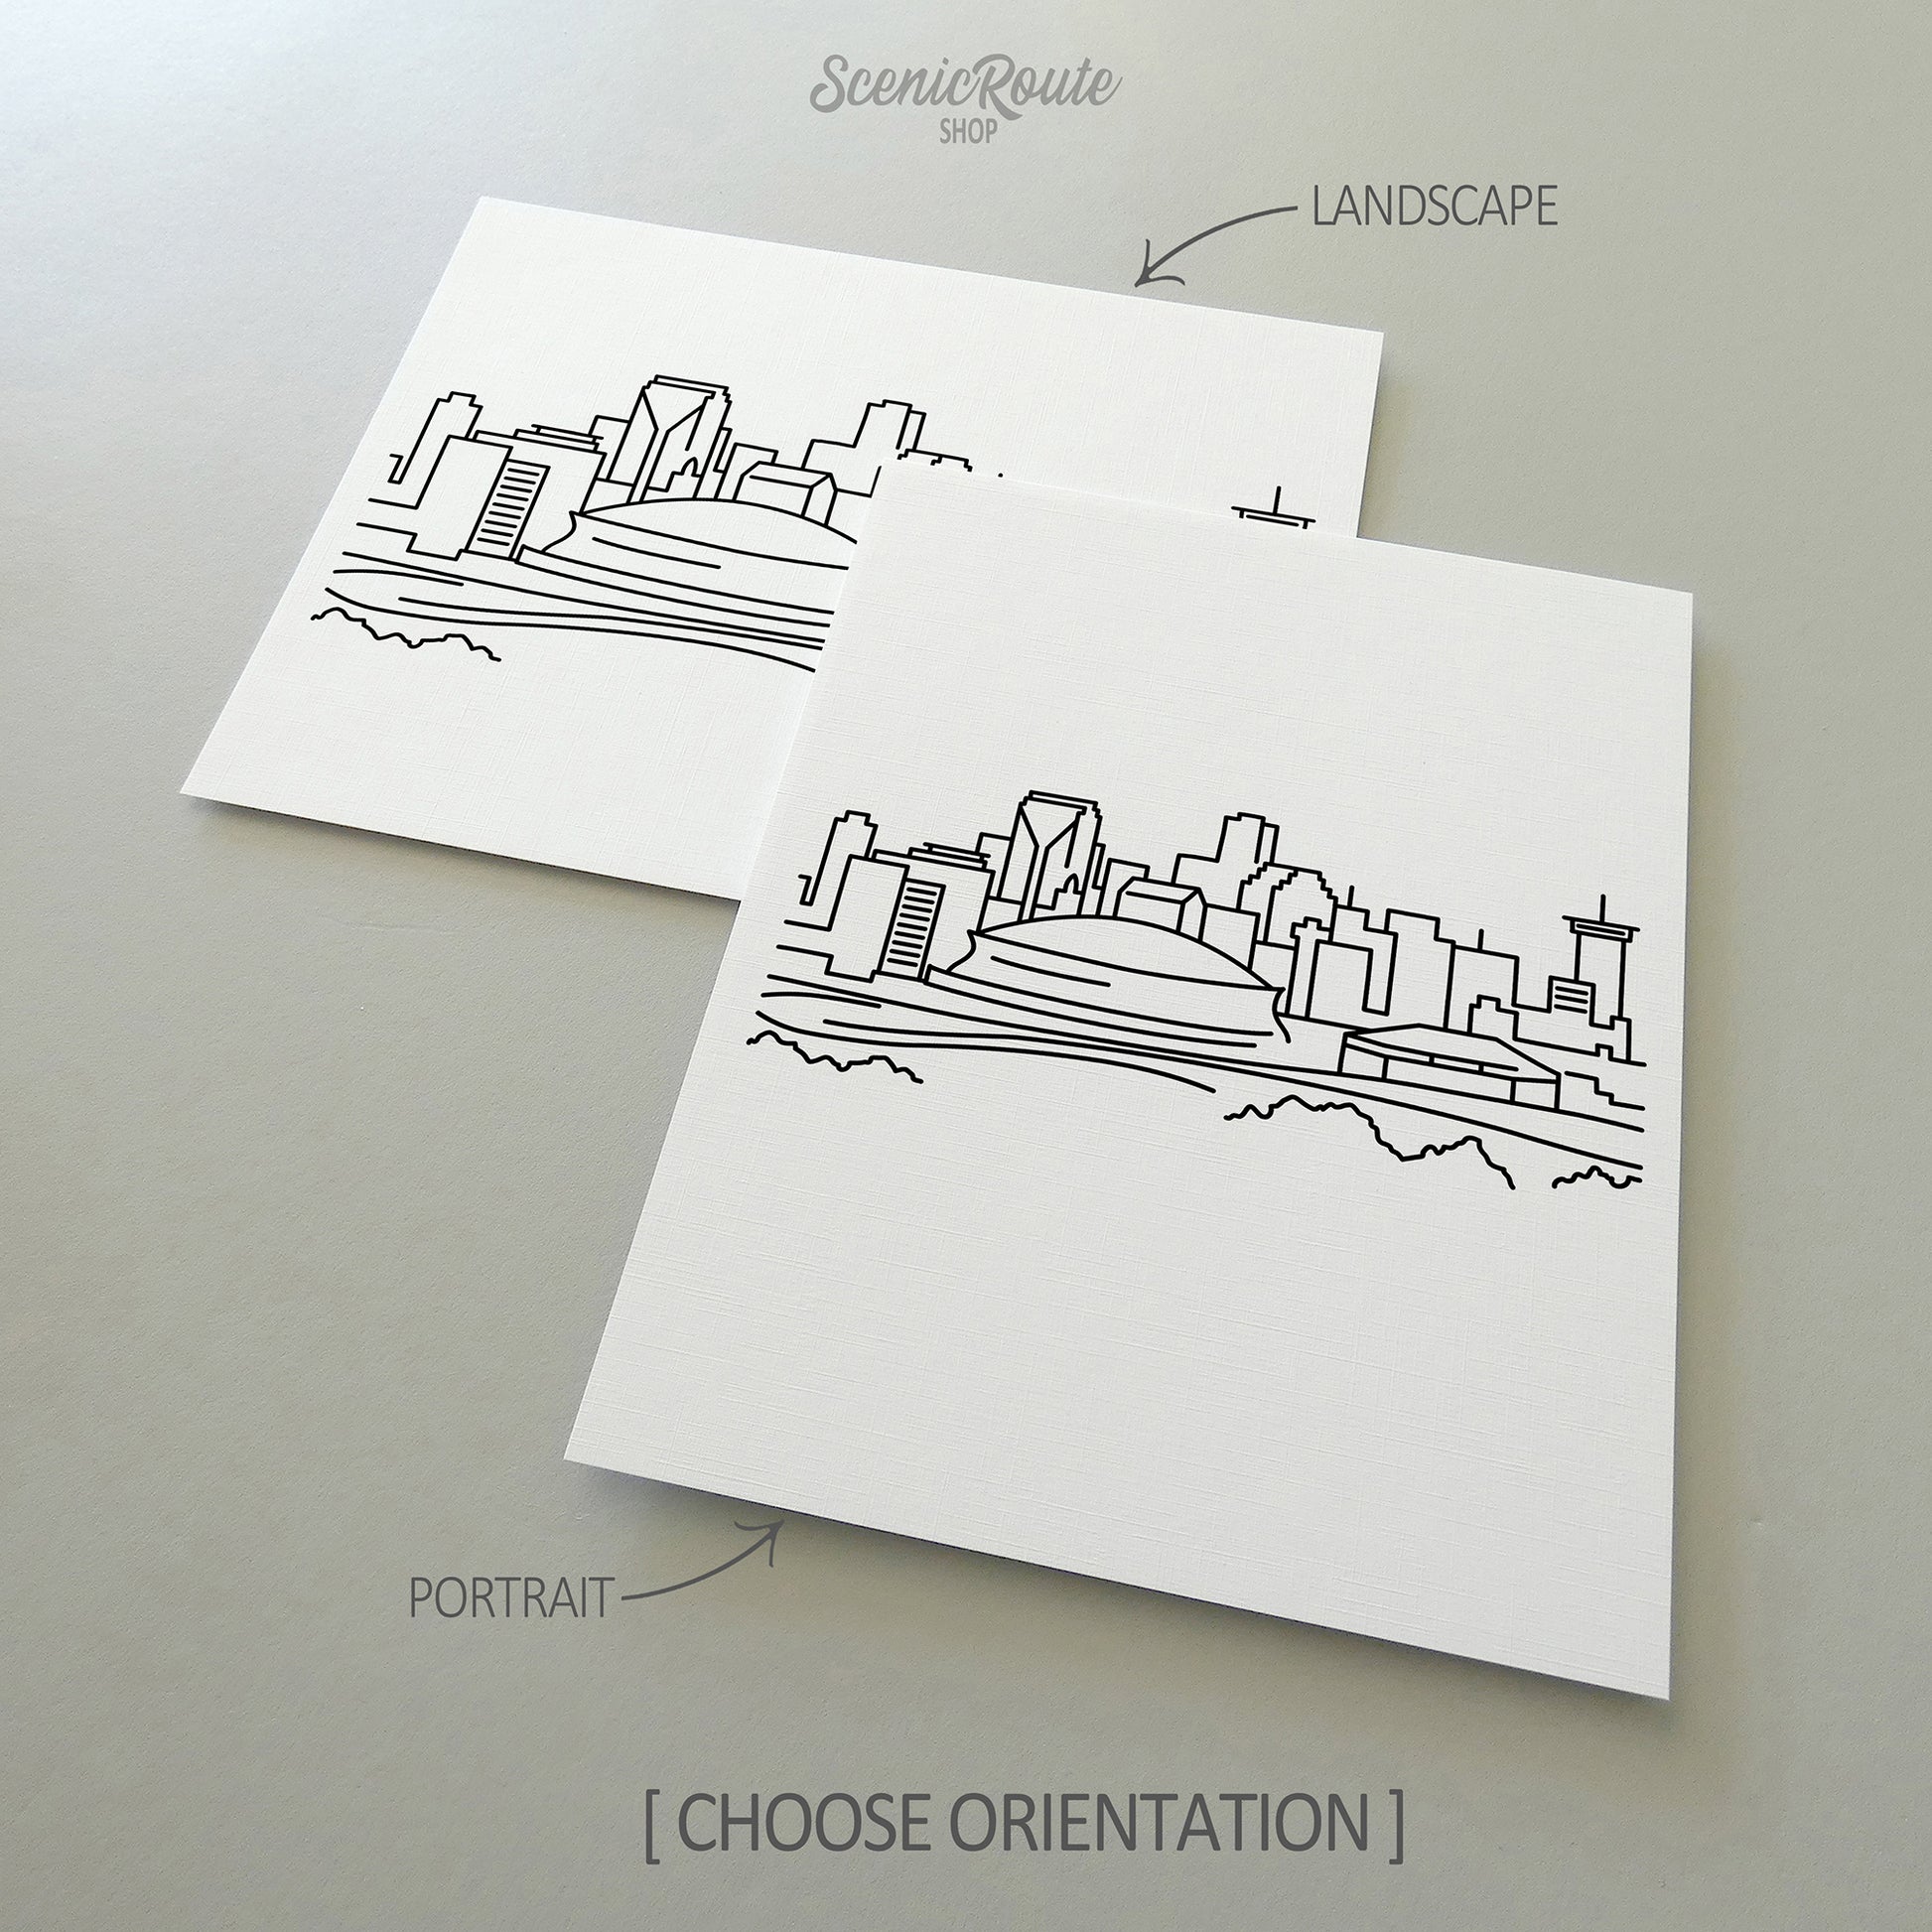 Two line art drawings of the New Orleans Skyline on white linen paper with a gray background.  The pieces are shown in portrait and landscape orientation for the available art print options.